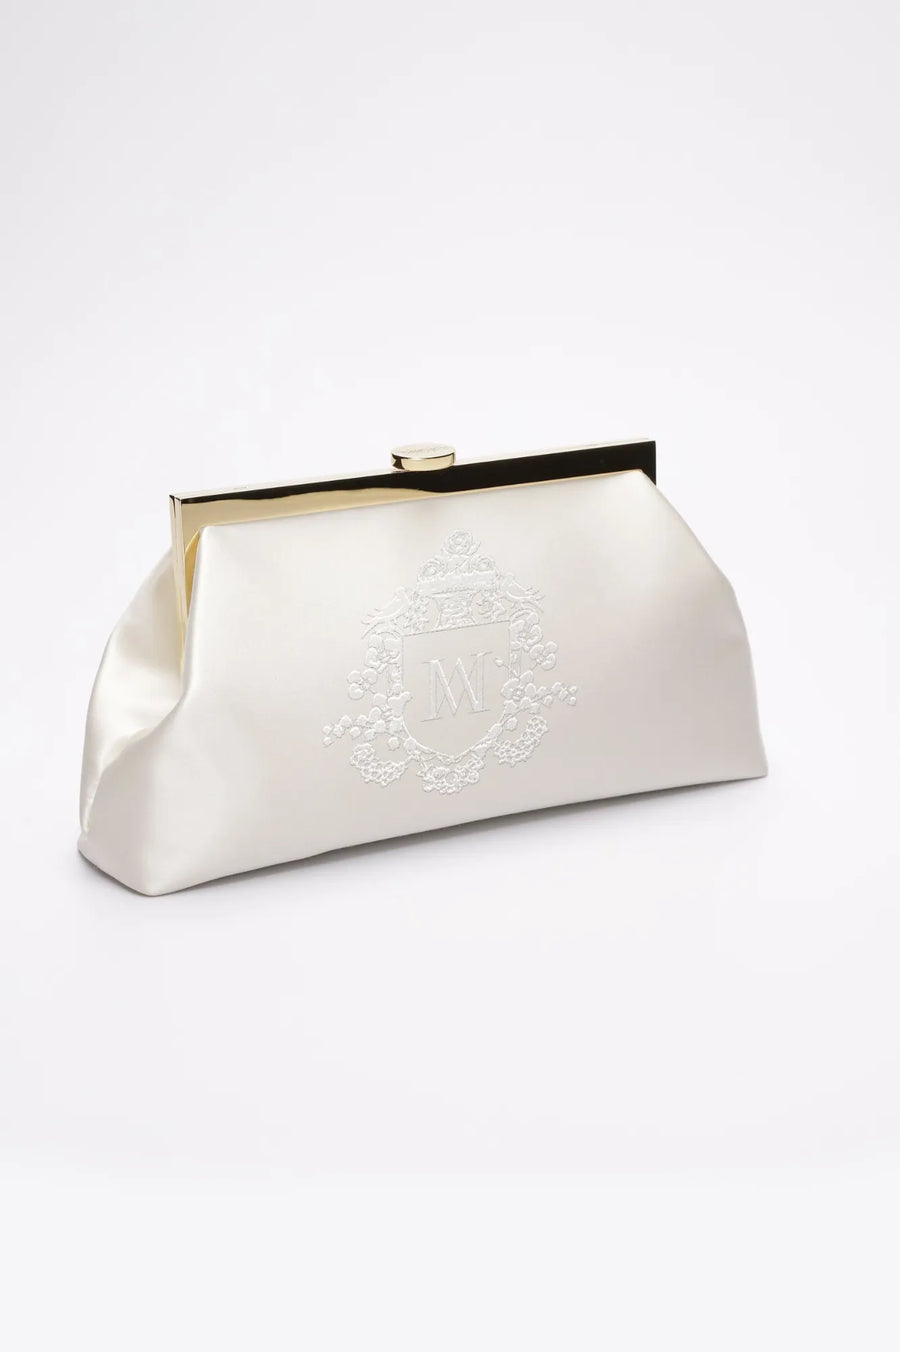 Side angle of a white bridal clutch with Whyte bridal wedding crest, monogram embroidery.